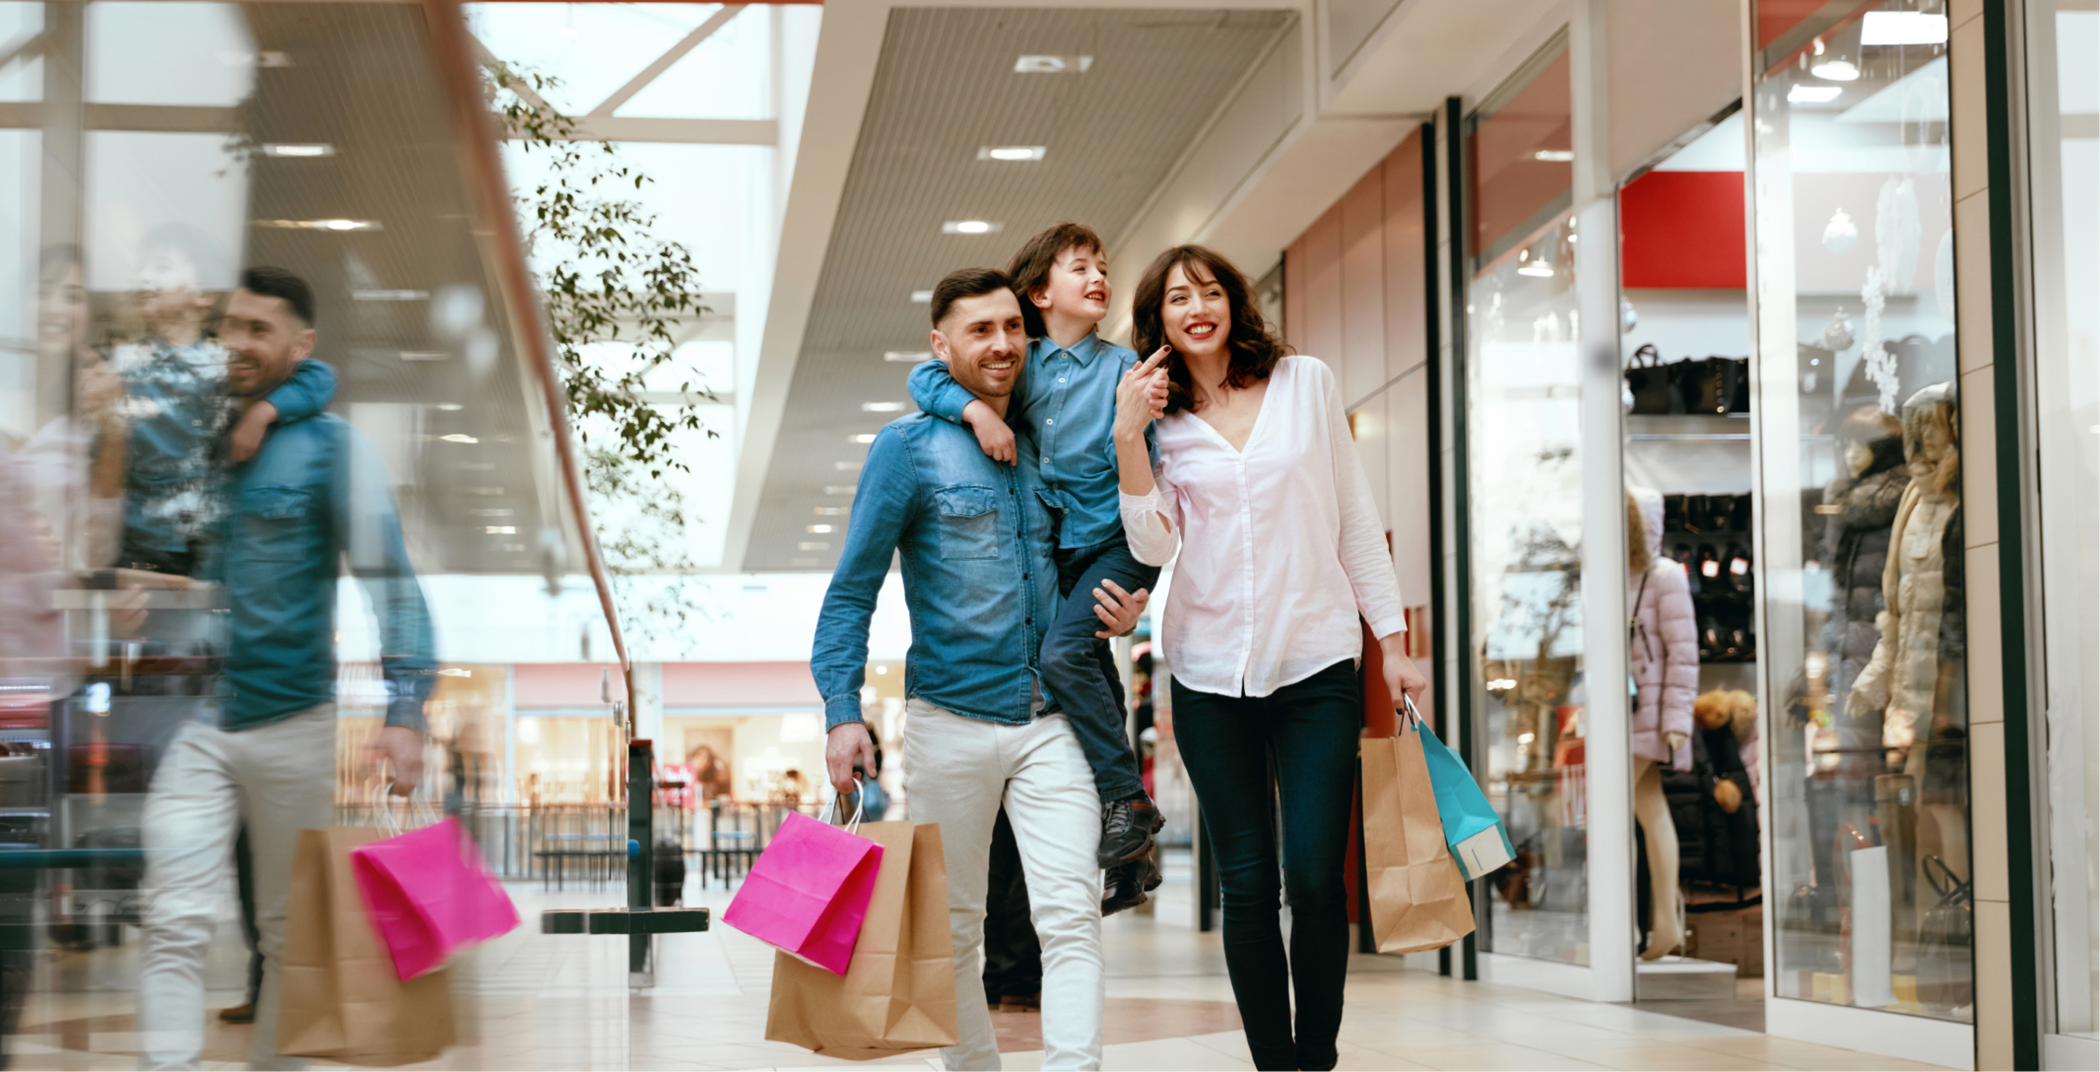 Stock image of young family in a mall